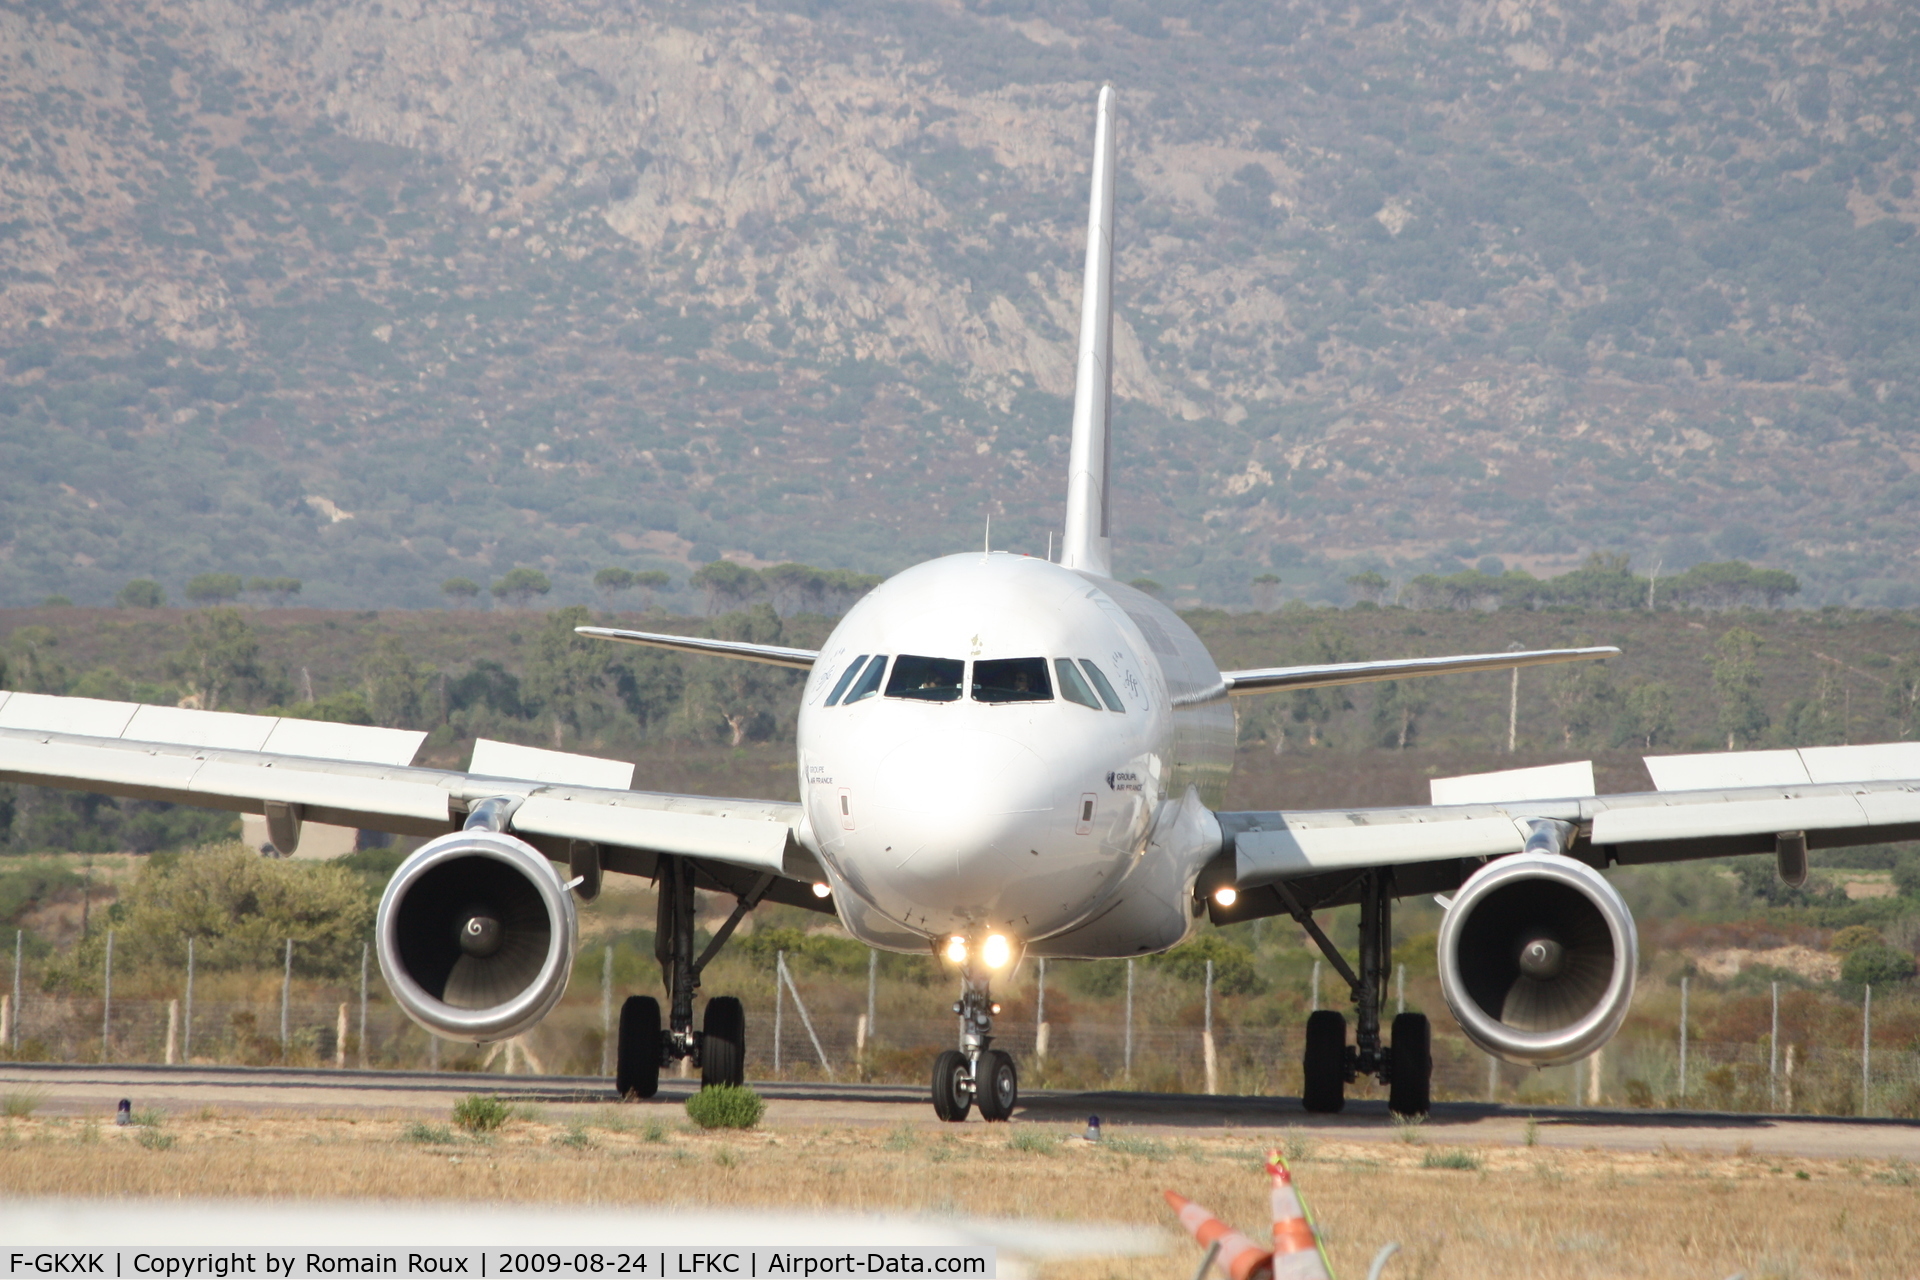 F-GKXK, 2003 Airbus A320-214 C/N 2140, Taxiing